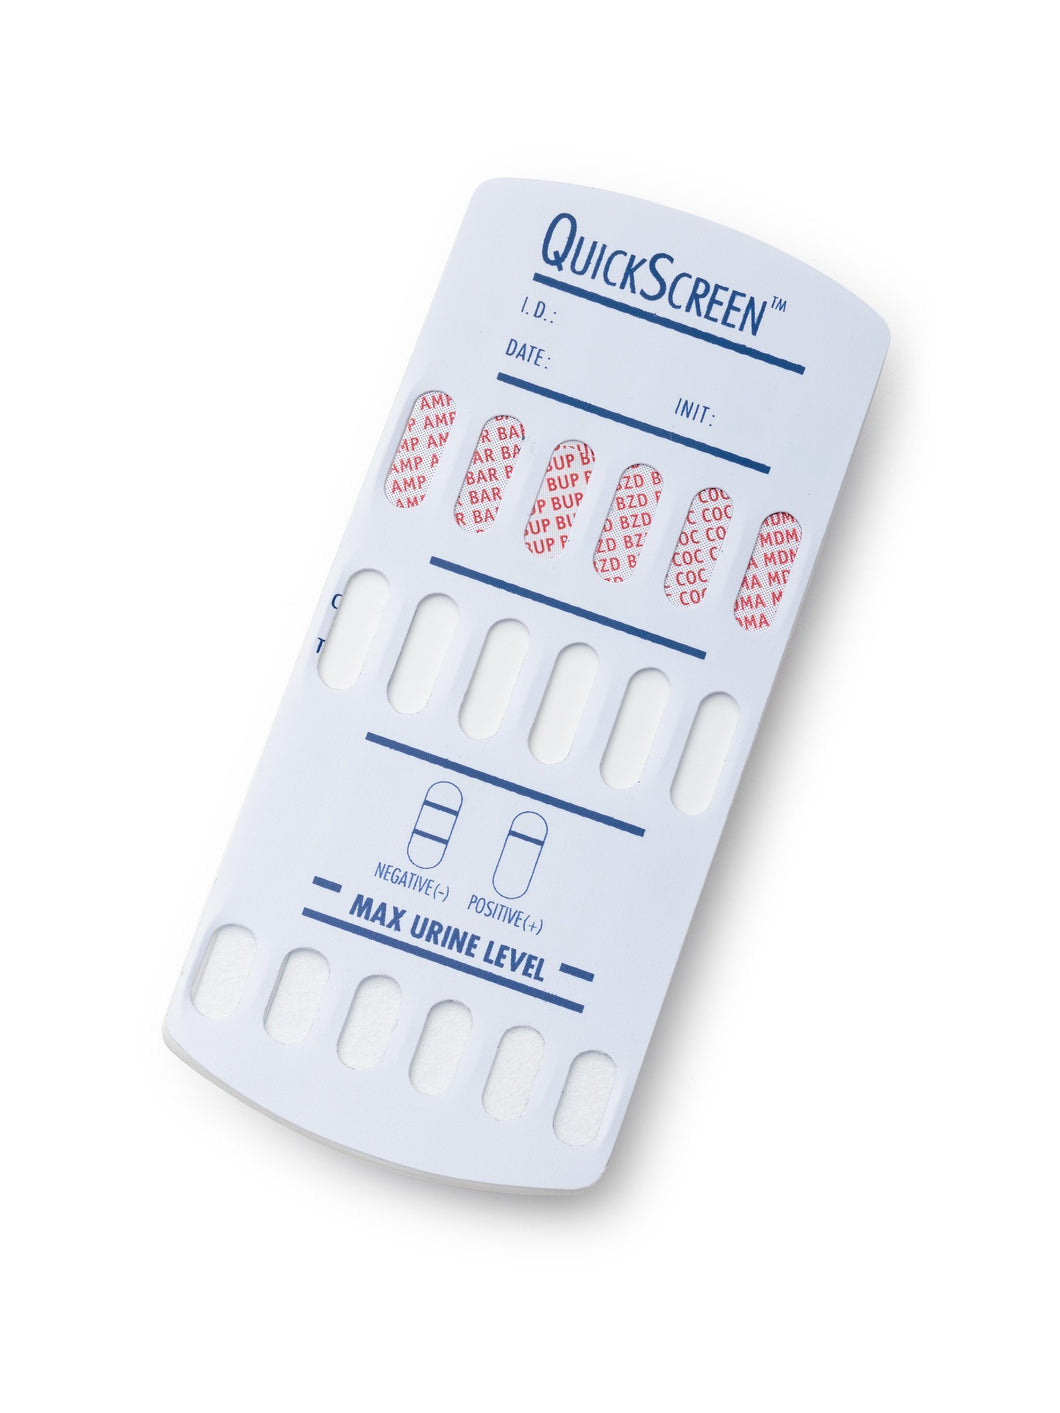 (25 Pack) 12 Panel QuickScreen Dip Card - 9402 - AMP, BAR, BZD, BUP-10, COC-300, MDMA, MET-500, MTD, OPI-300, OXY-100, PCP, THC + Timer-Countrywide Testing